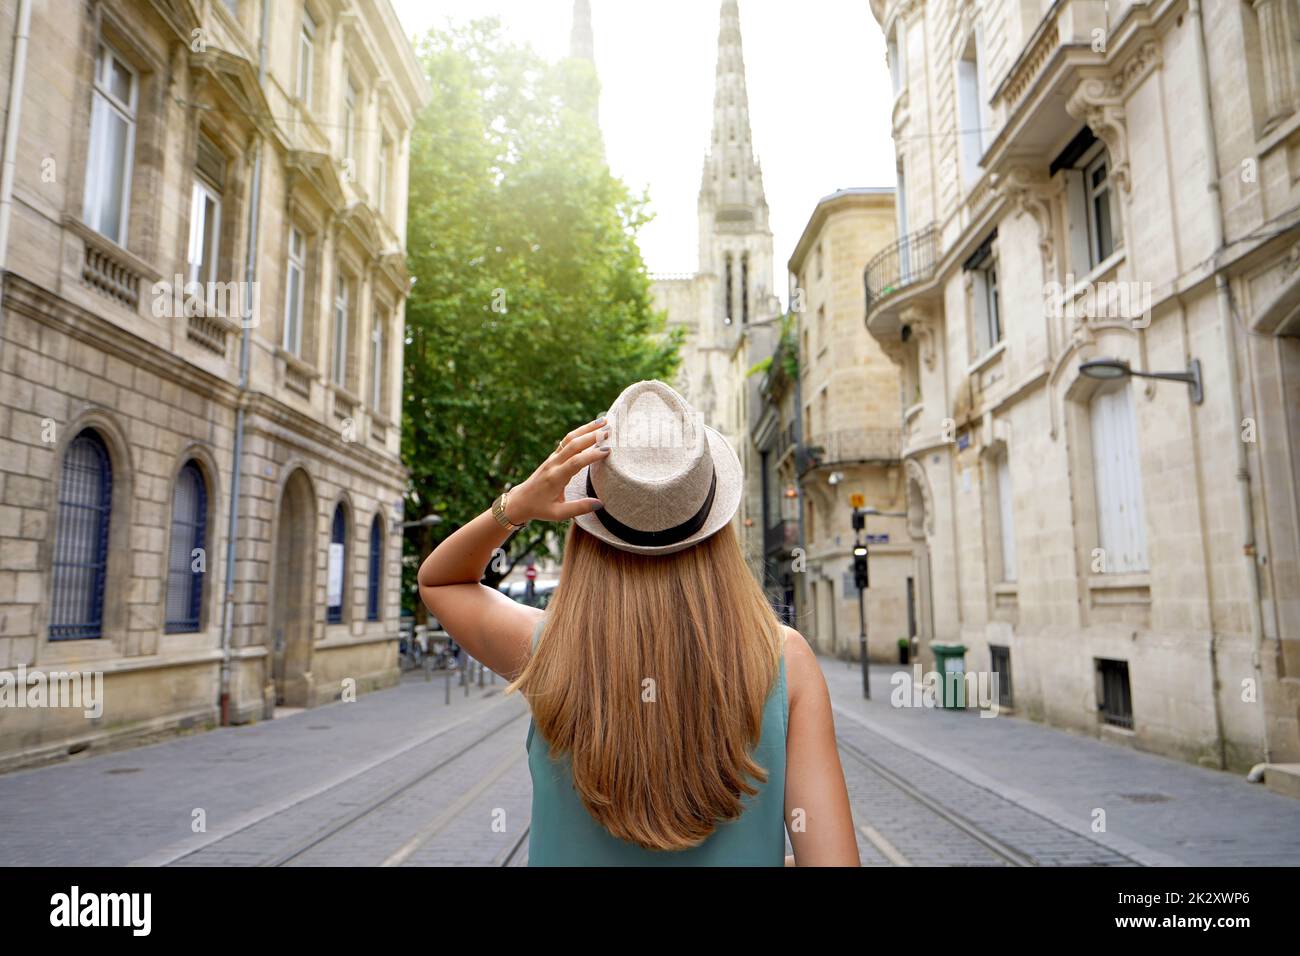 Visting Bordeaux, France. Tourist goes along Rue Vital Charles towards the Cathedral in Bordeaux, France. Stock Photo